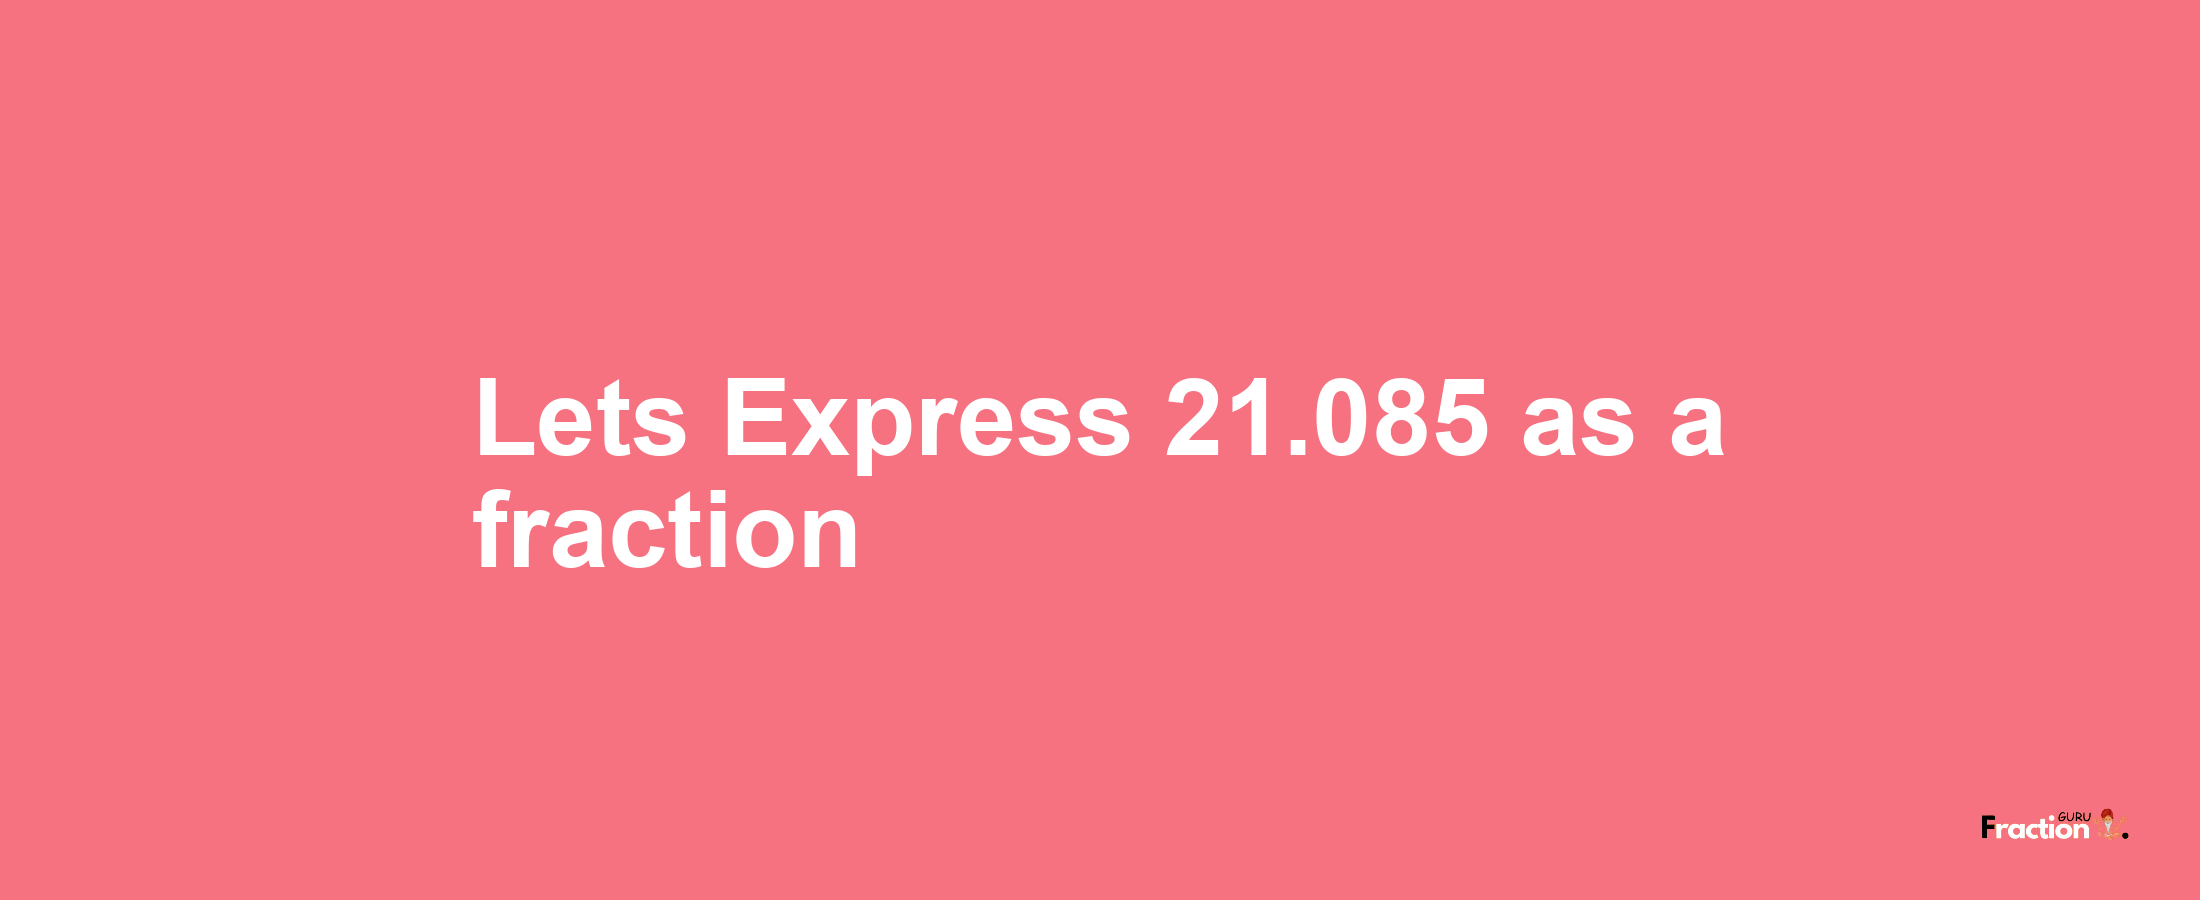 Lets Express 21.085 as afraction